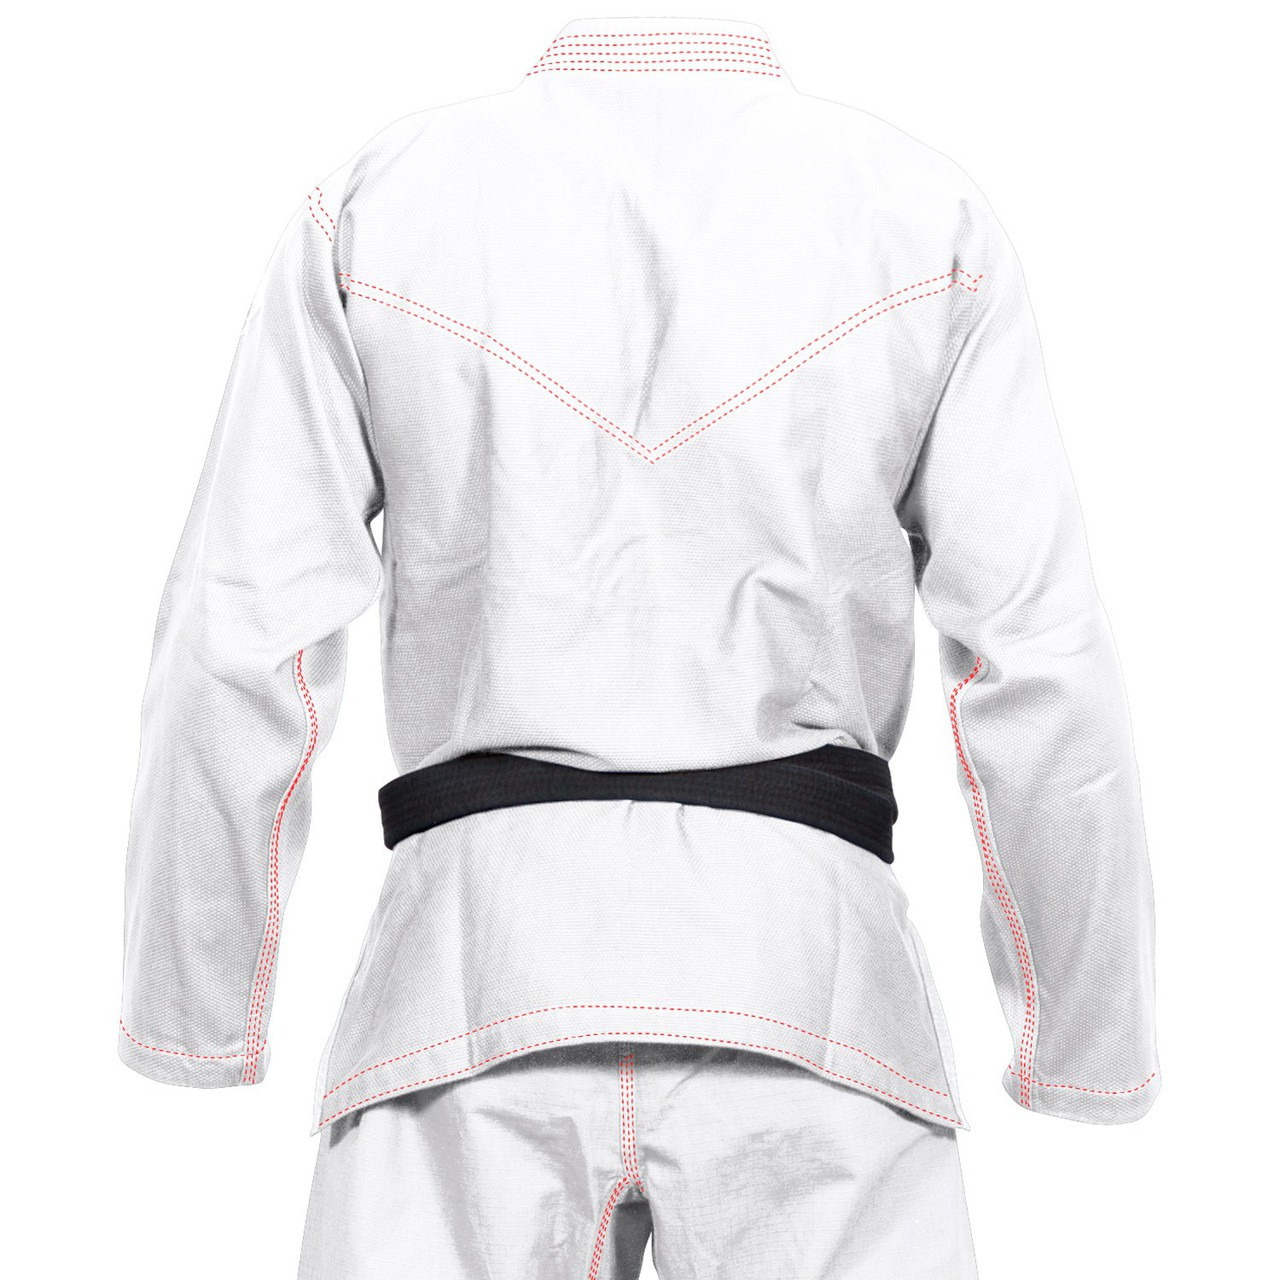 Back of the Venum Elite Light BJJ GI in White is now available at www.thejiujitsushop.com

Enjoy Free Shipping from The Jiu Jitsu Shop today! 